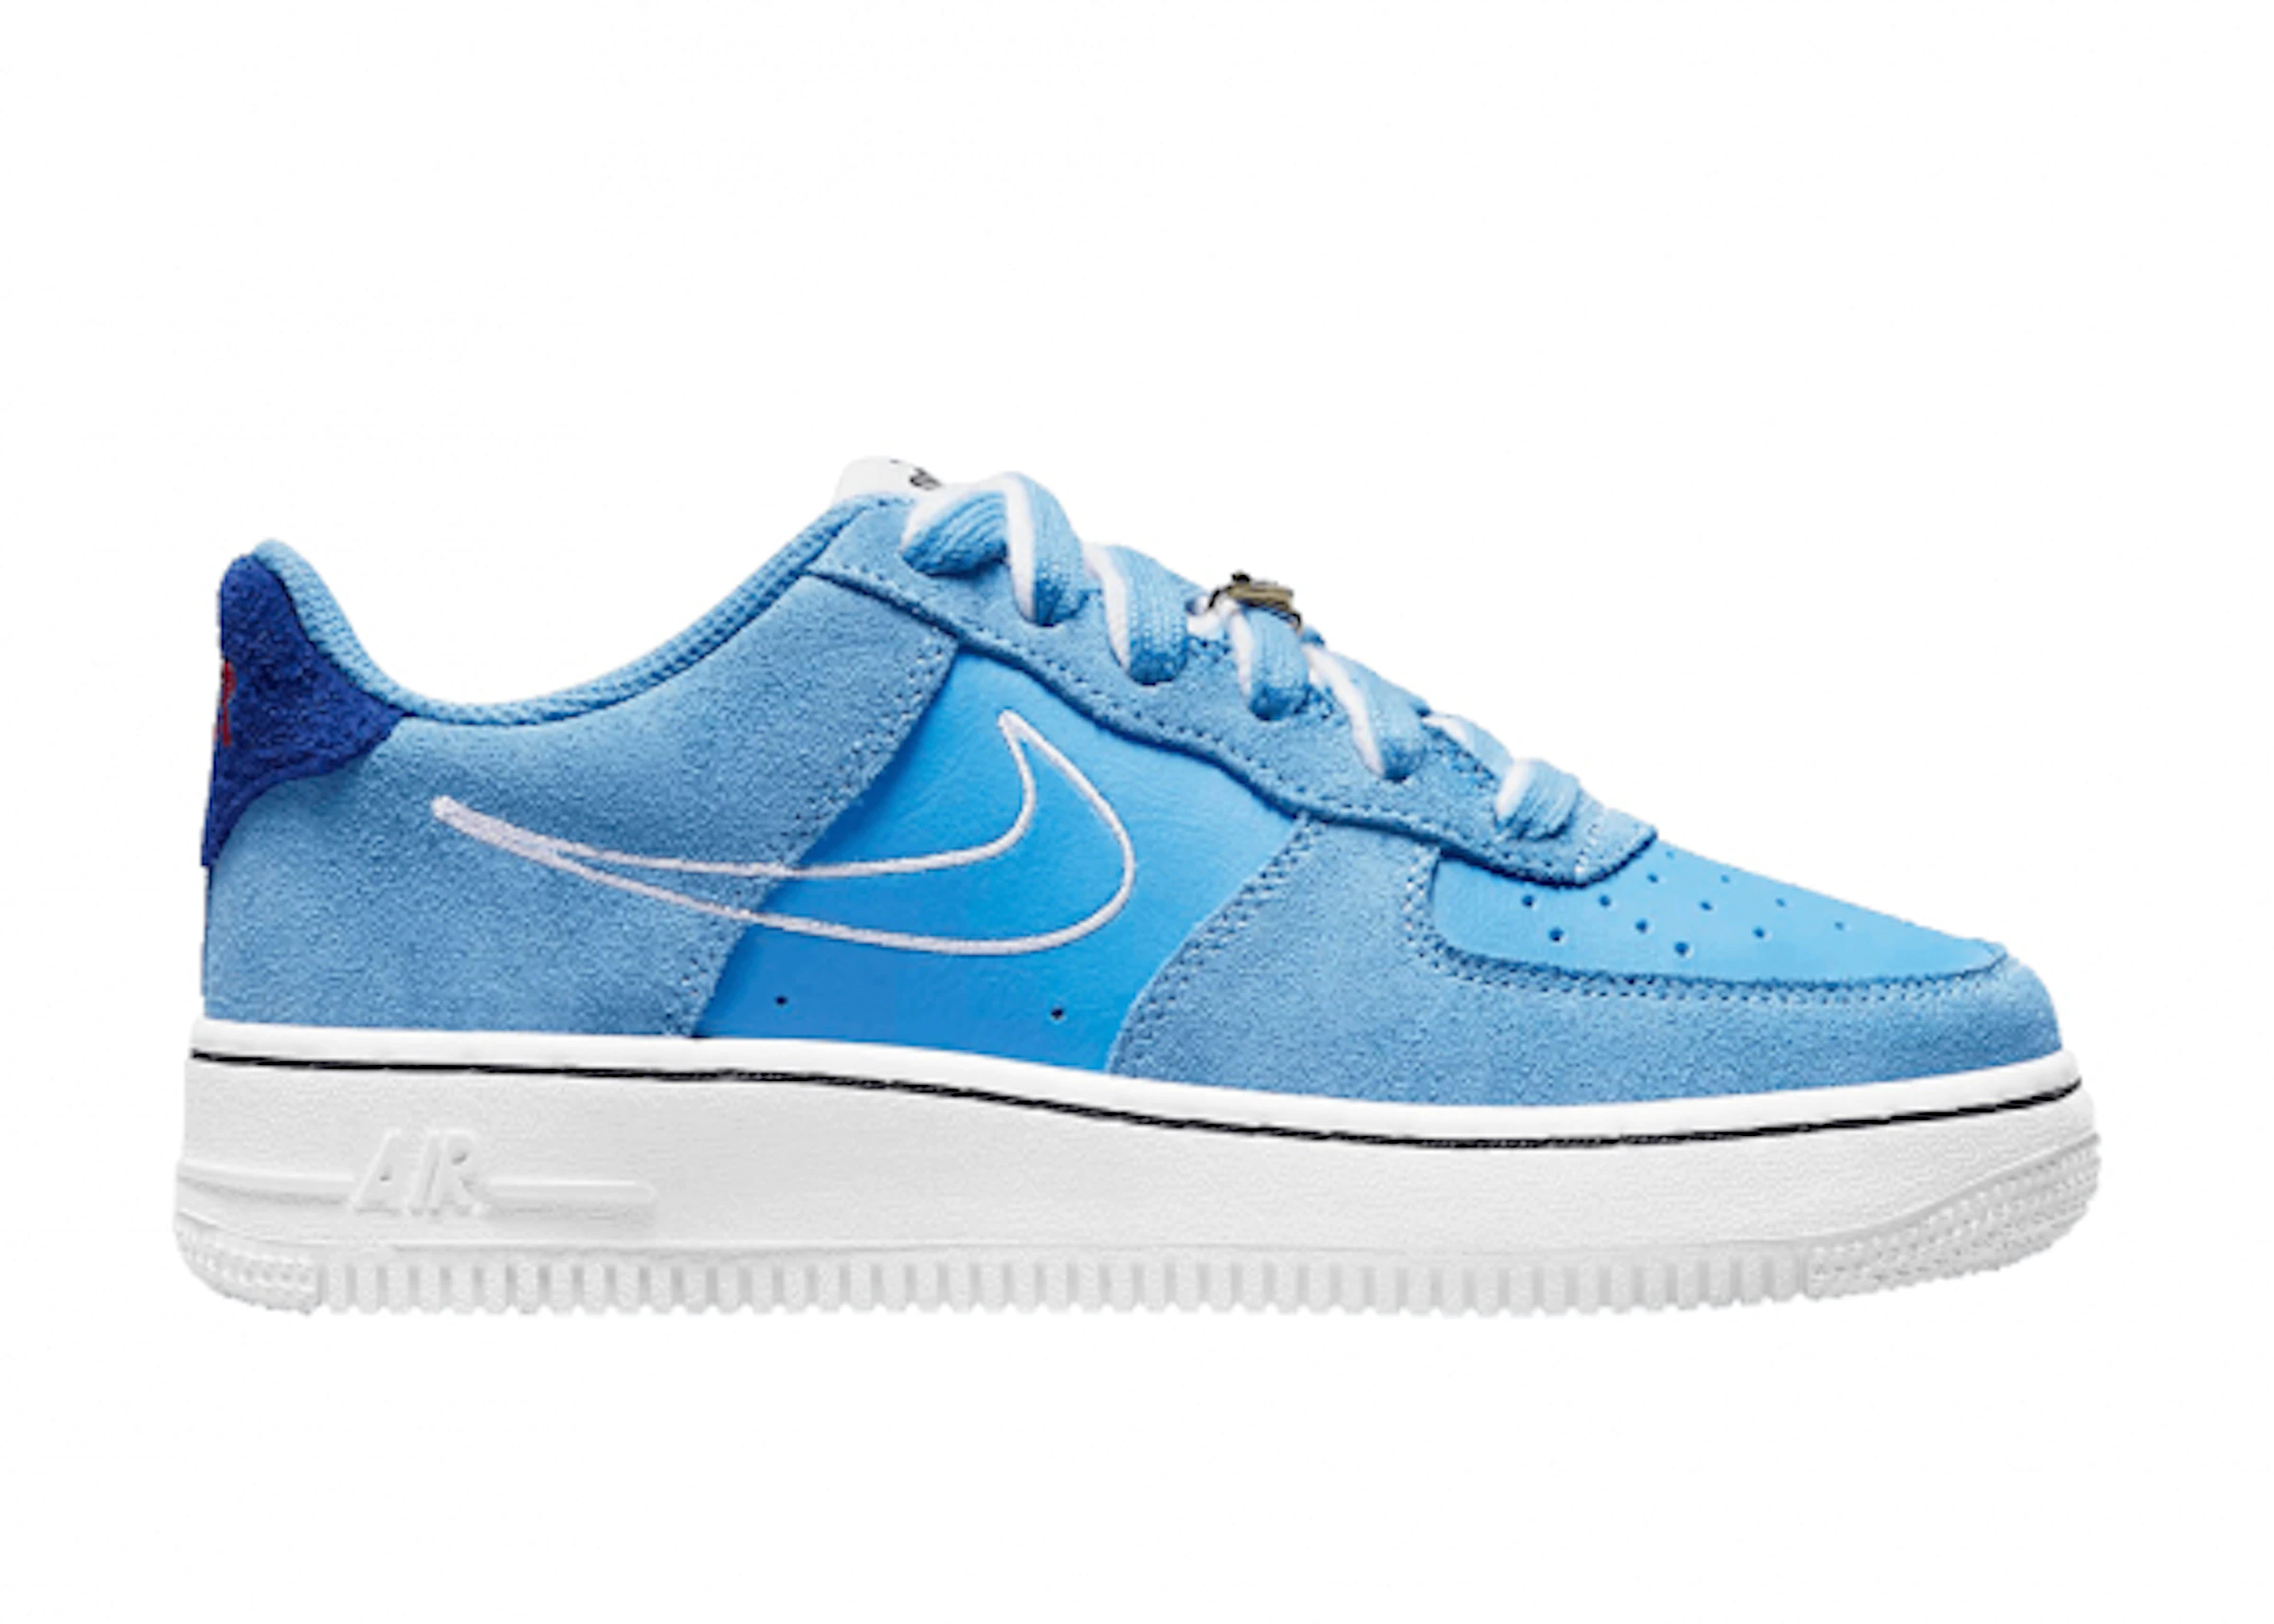 Gladys roller bungee jump Nike Air Force 1 Low LV8 S50 University Blue (GS) - DB1561-400 - US